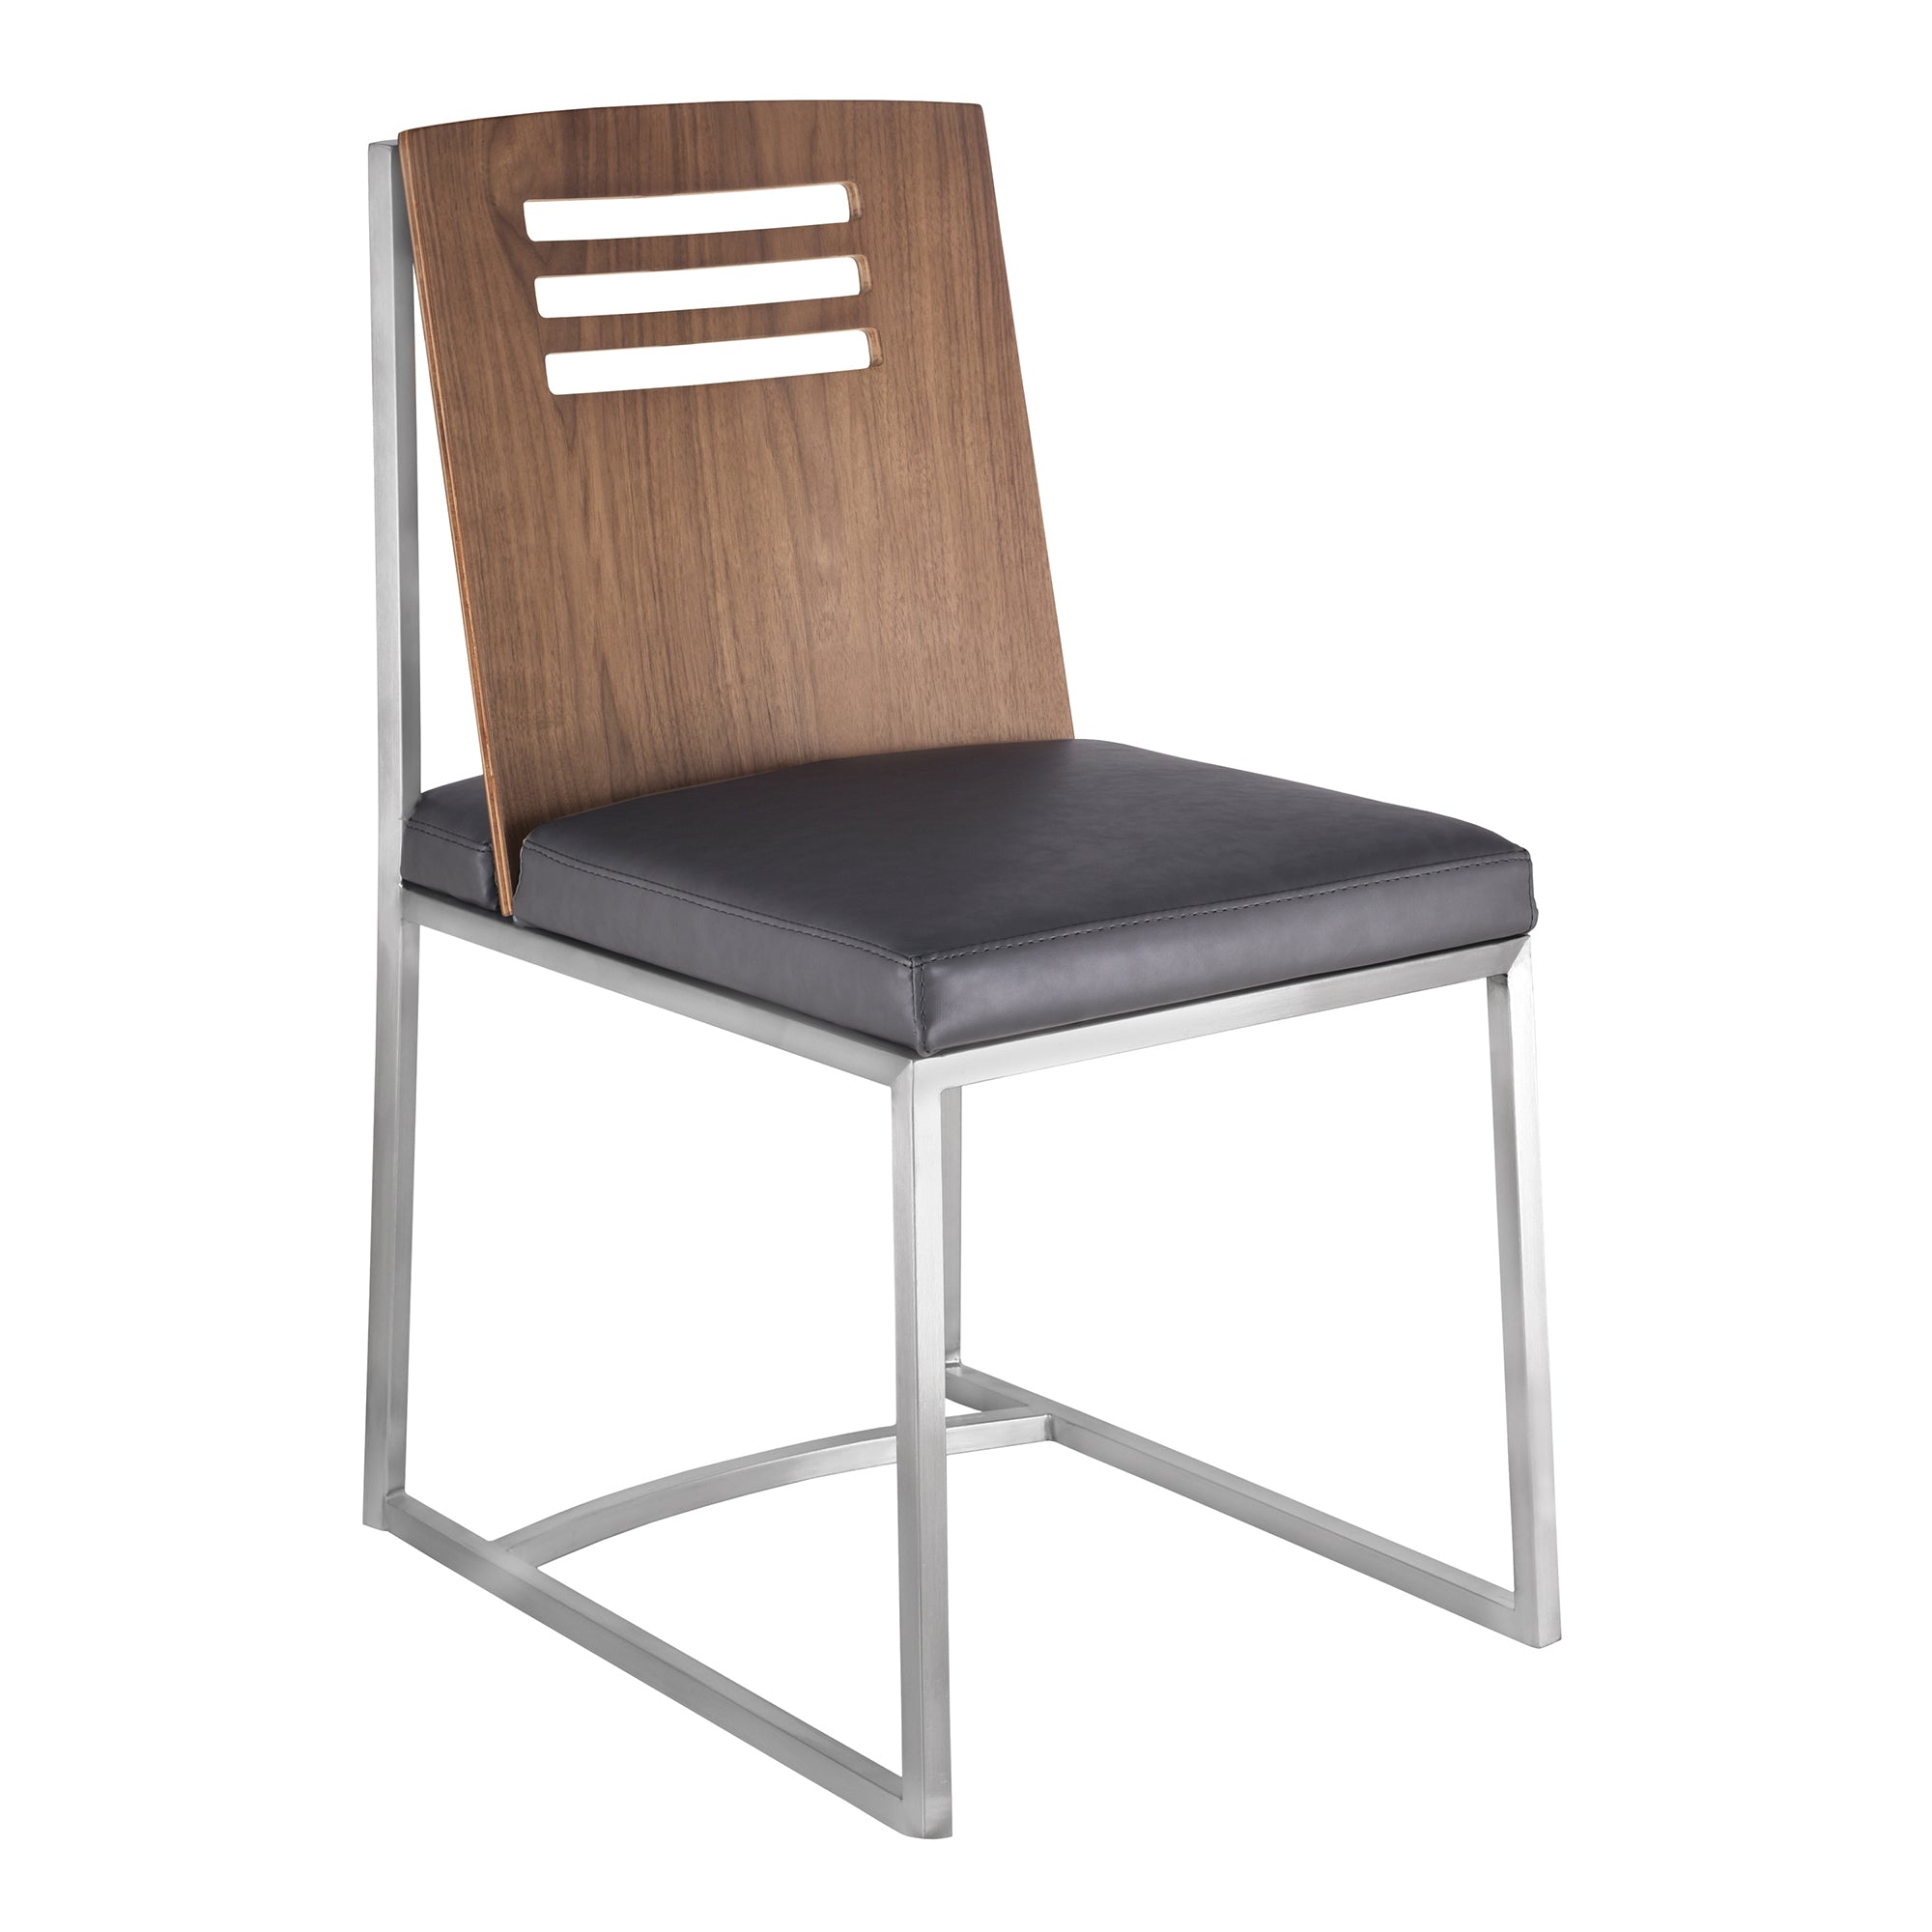 Armen Living Lcoxsivgbs Oxford Dining Chair In Brushed Stainless Steel With Vintage Grey Faux Leather And Walnut Wood Back